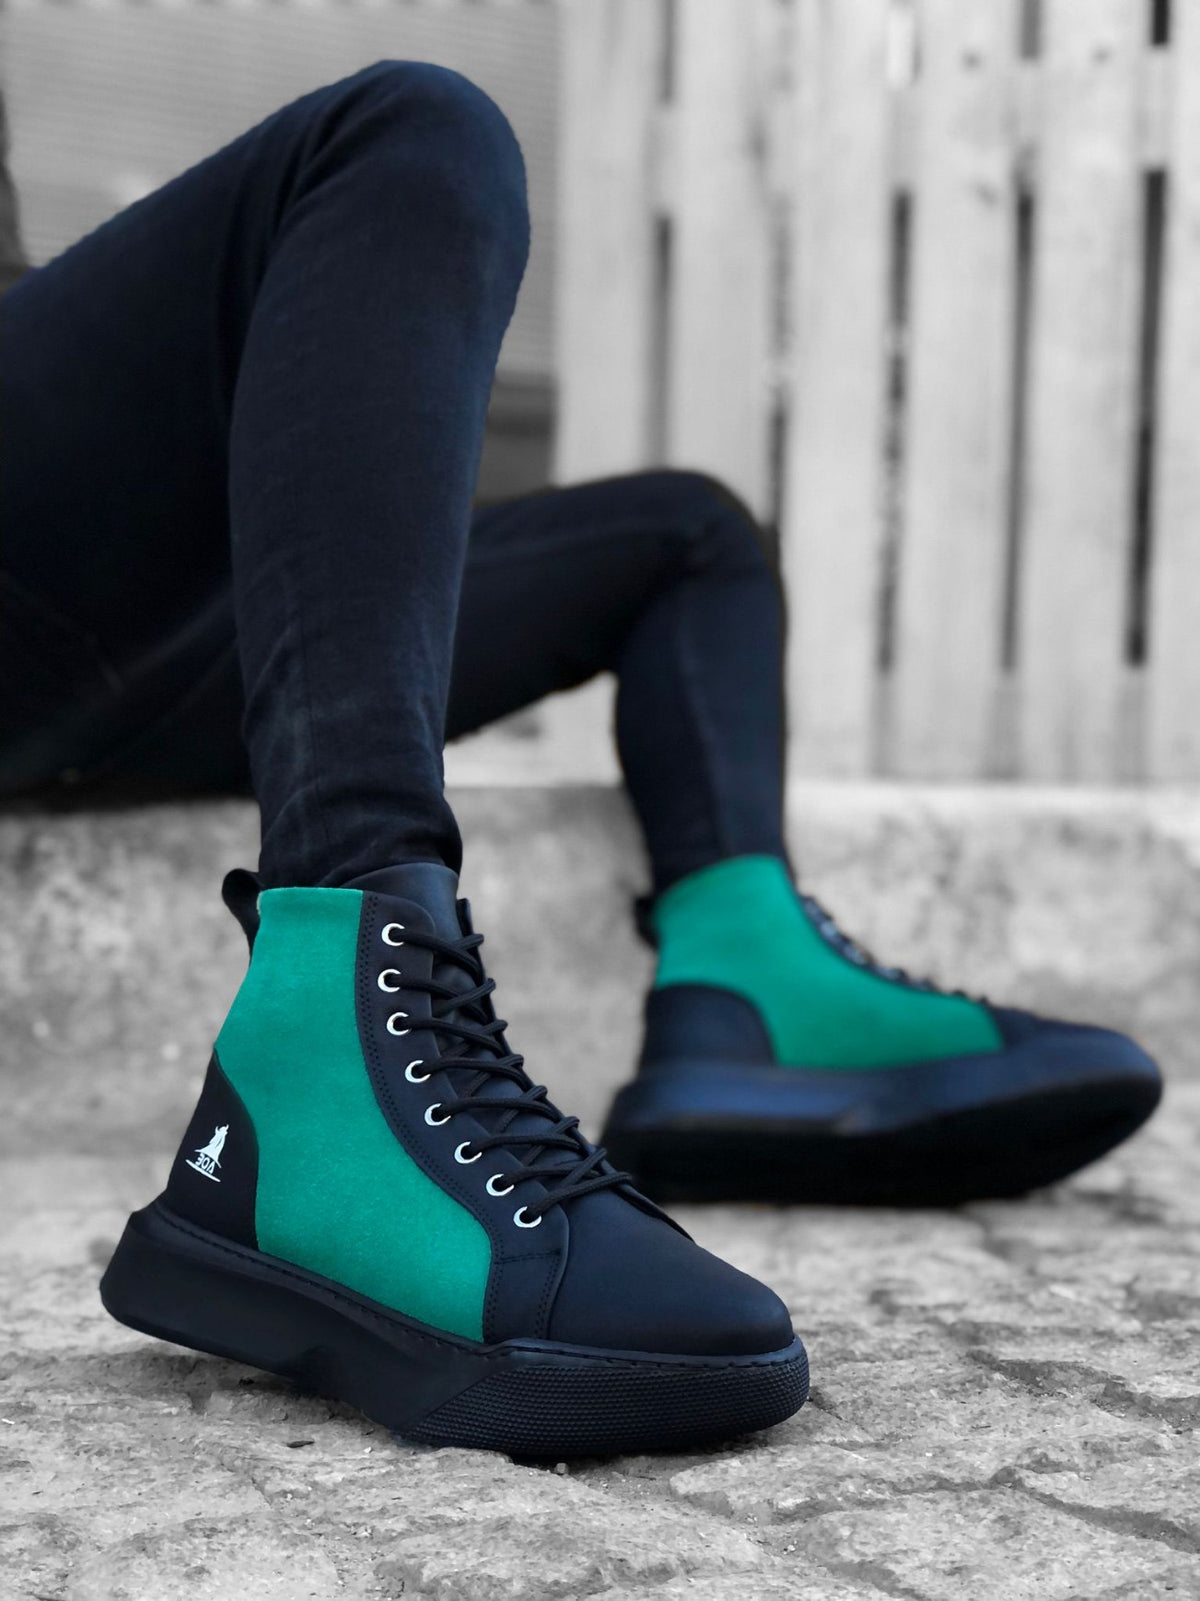 BA0256 Lace-up Men's High Sole Black Green Sole Sports Boots - STREETMODE ™